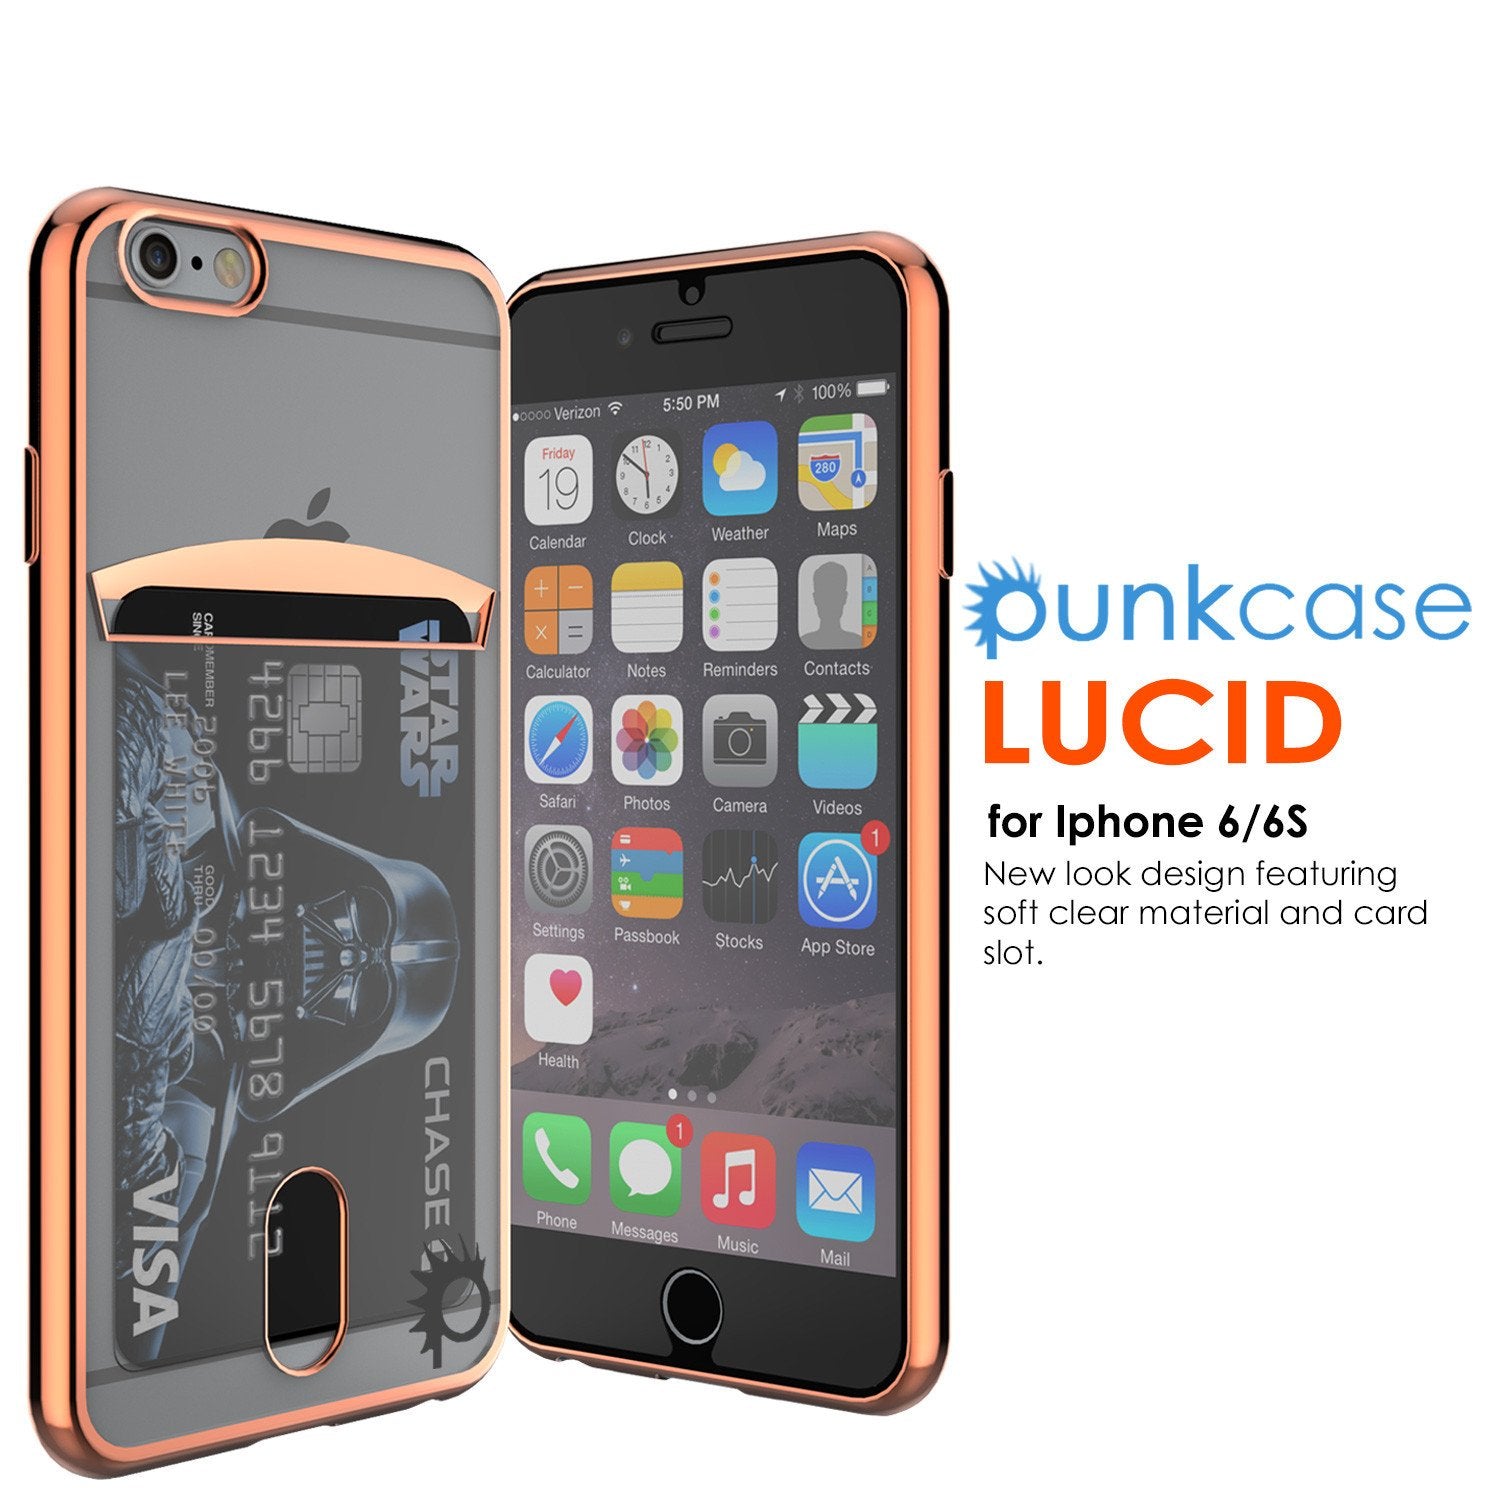 iPhone 6s+ Plus/6+ Plus Case, PUNKCASE® LUCID Rose Gold Series | Card Slot | SHIELD Screen Protector - PunkCase NZ